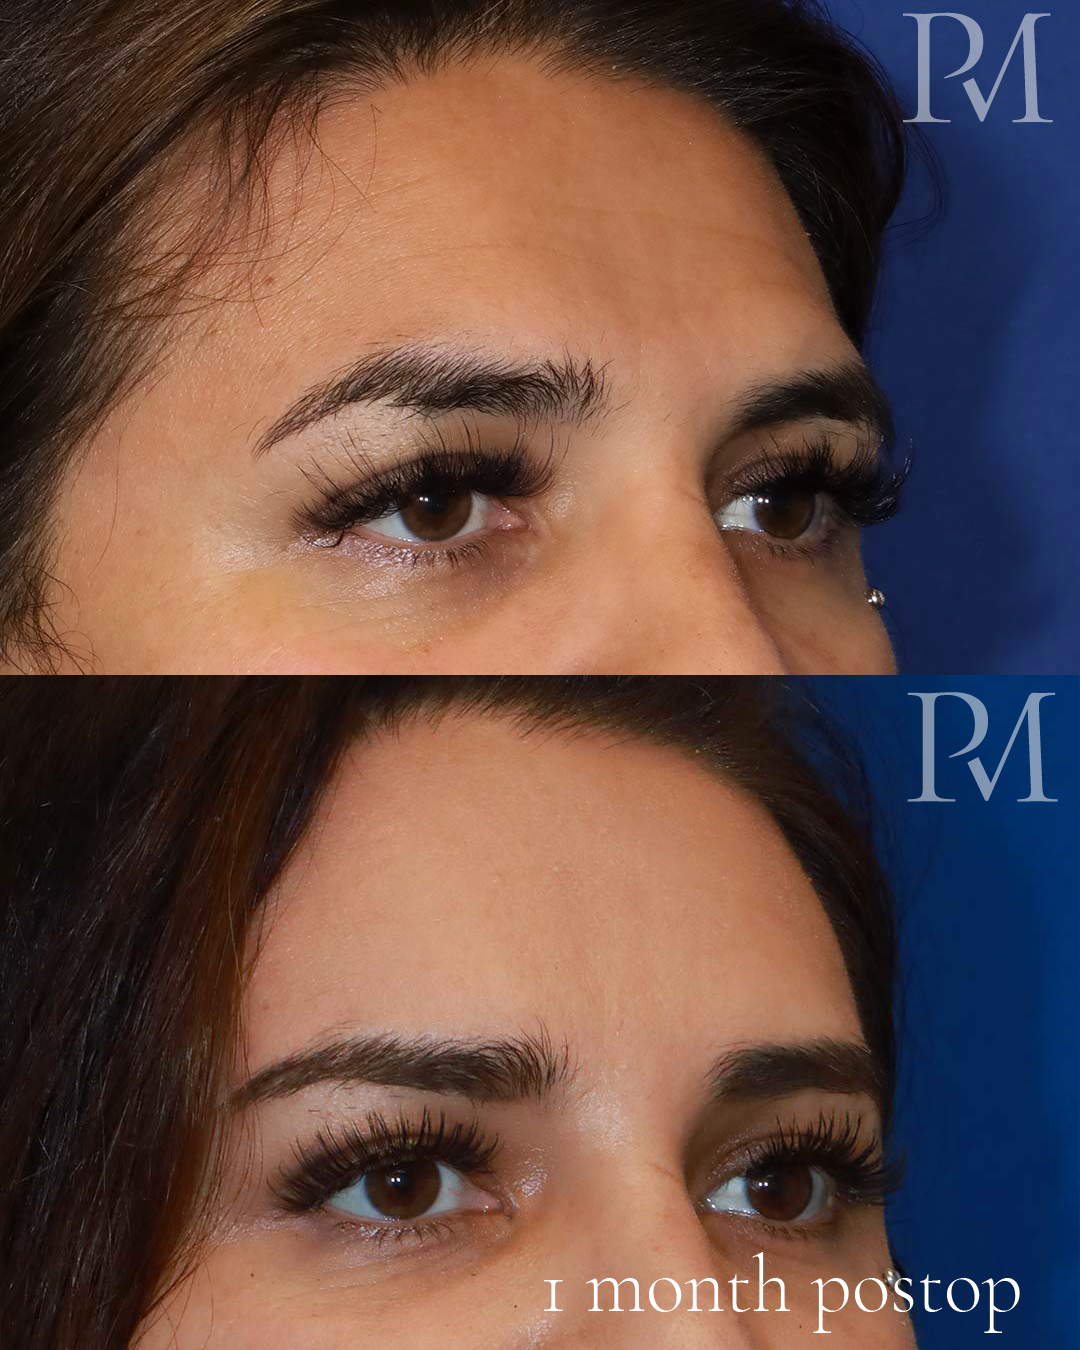 forehead feminization before and after
type 3 before after
type 3 brow bone reduction before after
type 3 setback before after